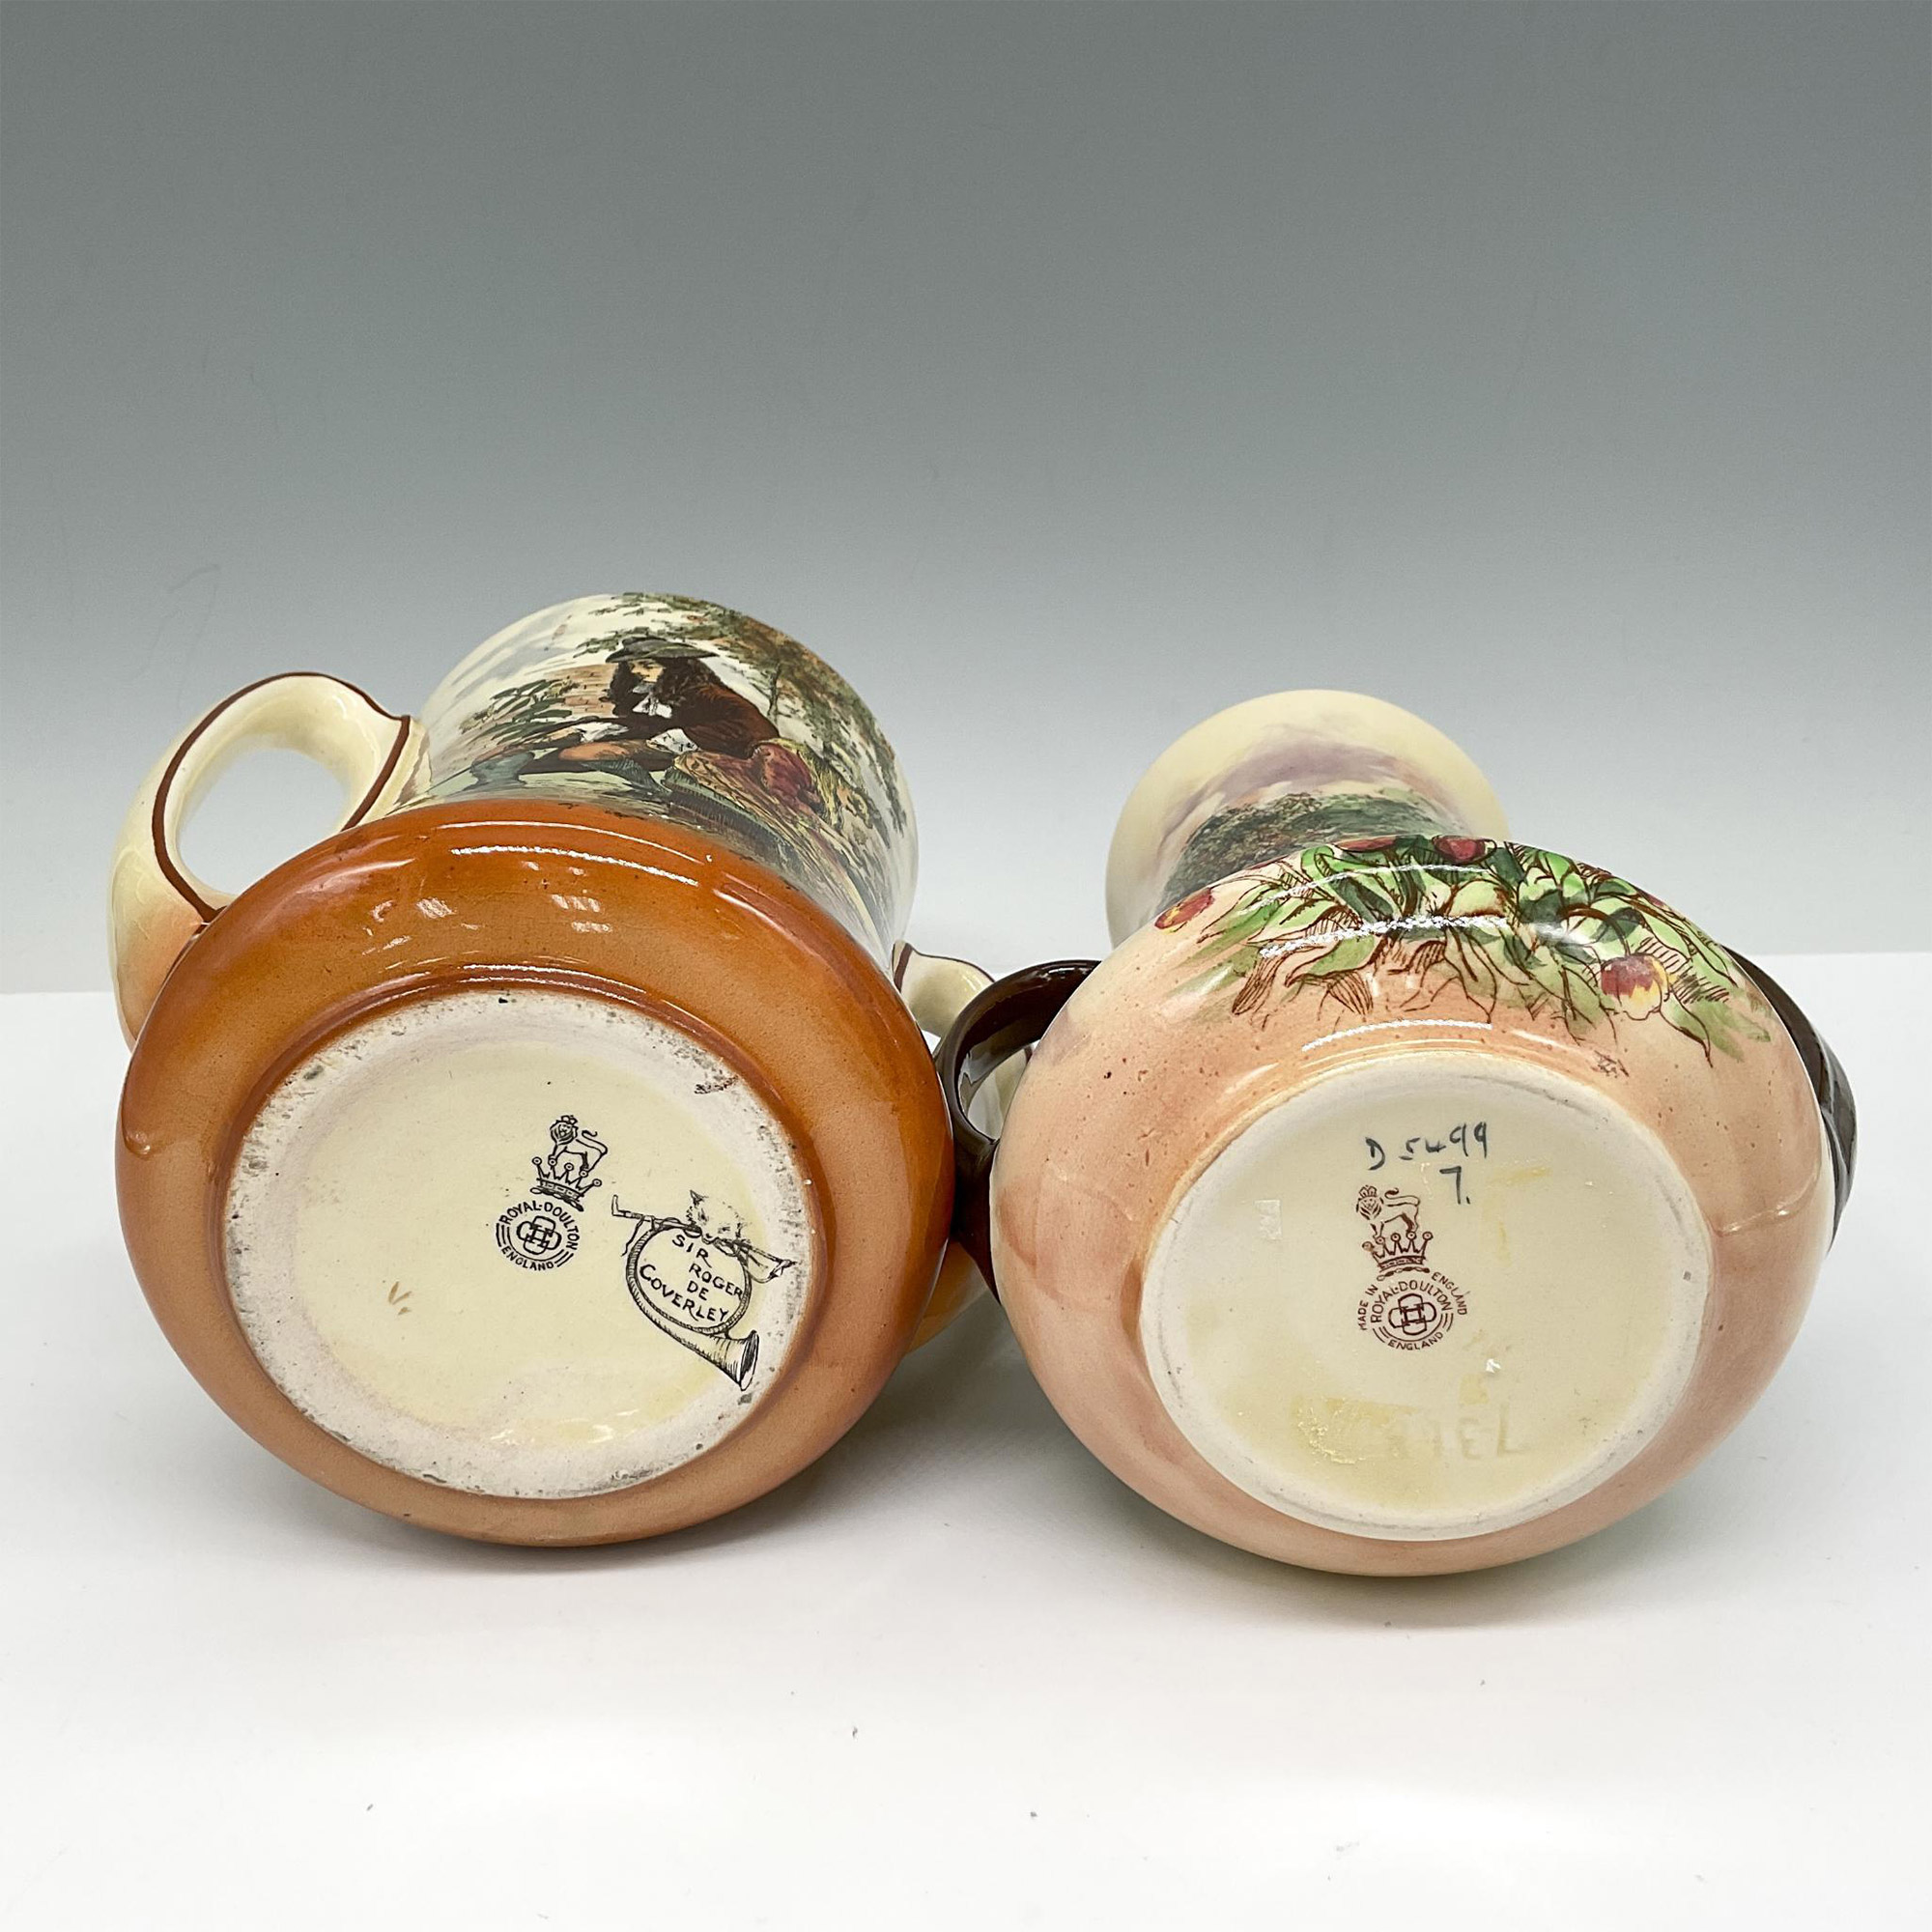 2pc Royal Doulton Series Ware Vases, Hundred Years Ago - Image 3 of 3